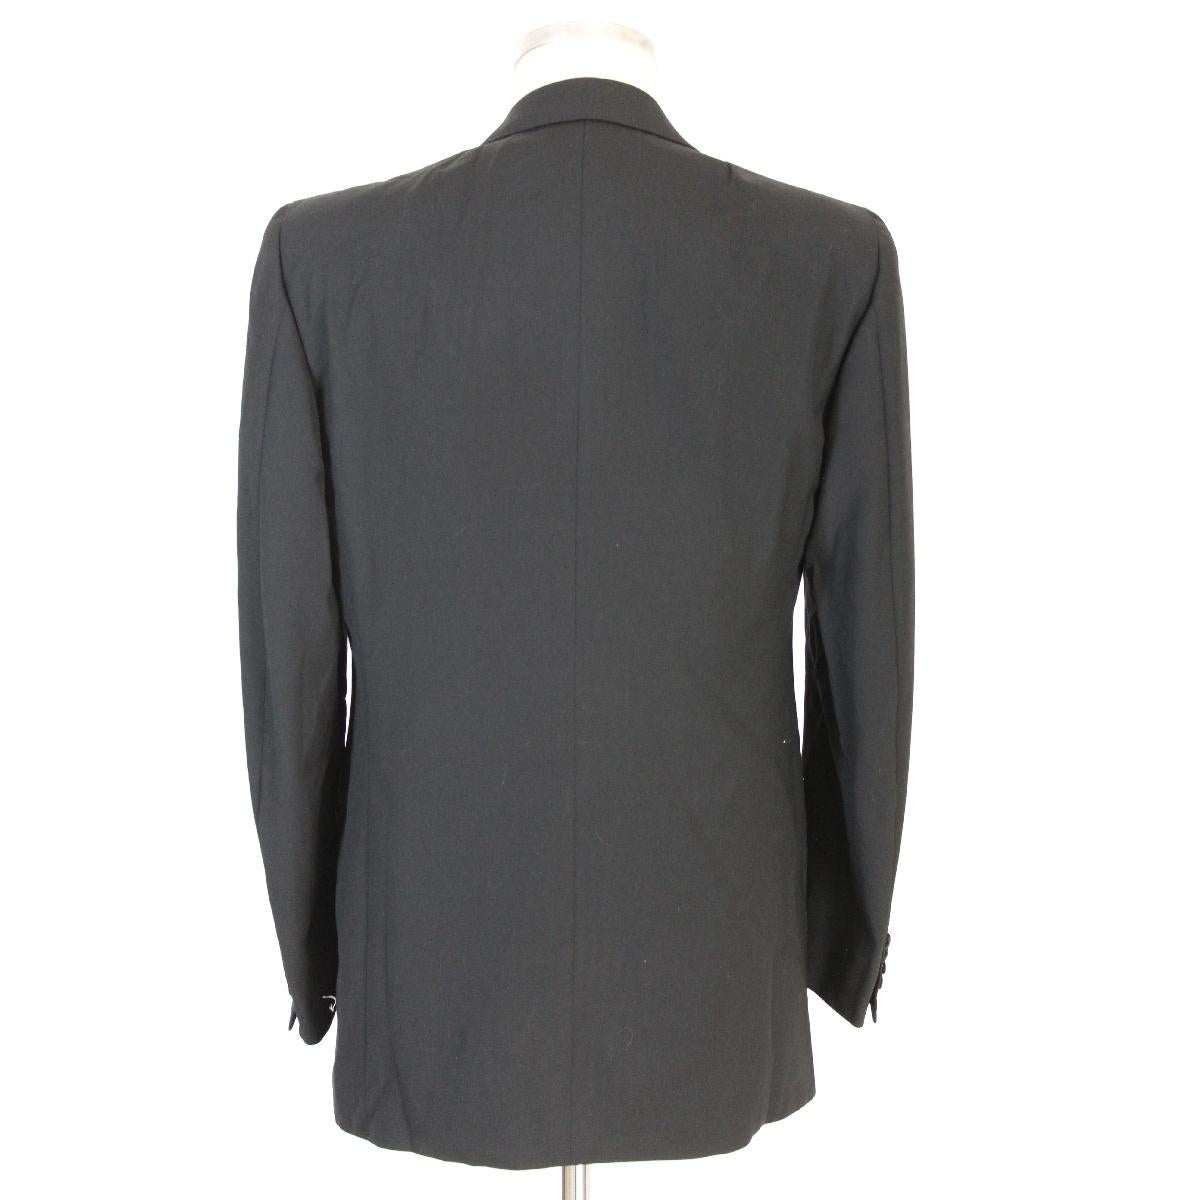 Brioni smoking vintage, black wool jacket, 1980s. Reverse in satin and on the pockets. Double-breasted made in Italy, size 50. New with label.

Size 50 It 40 Us 40 Uk

Shoulder: 50 cm
Bust / chest: 52 cm
Sleeves: 62 cm
Length: 82 cm